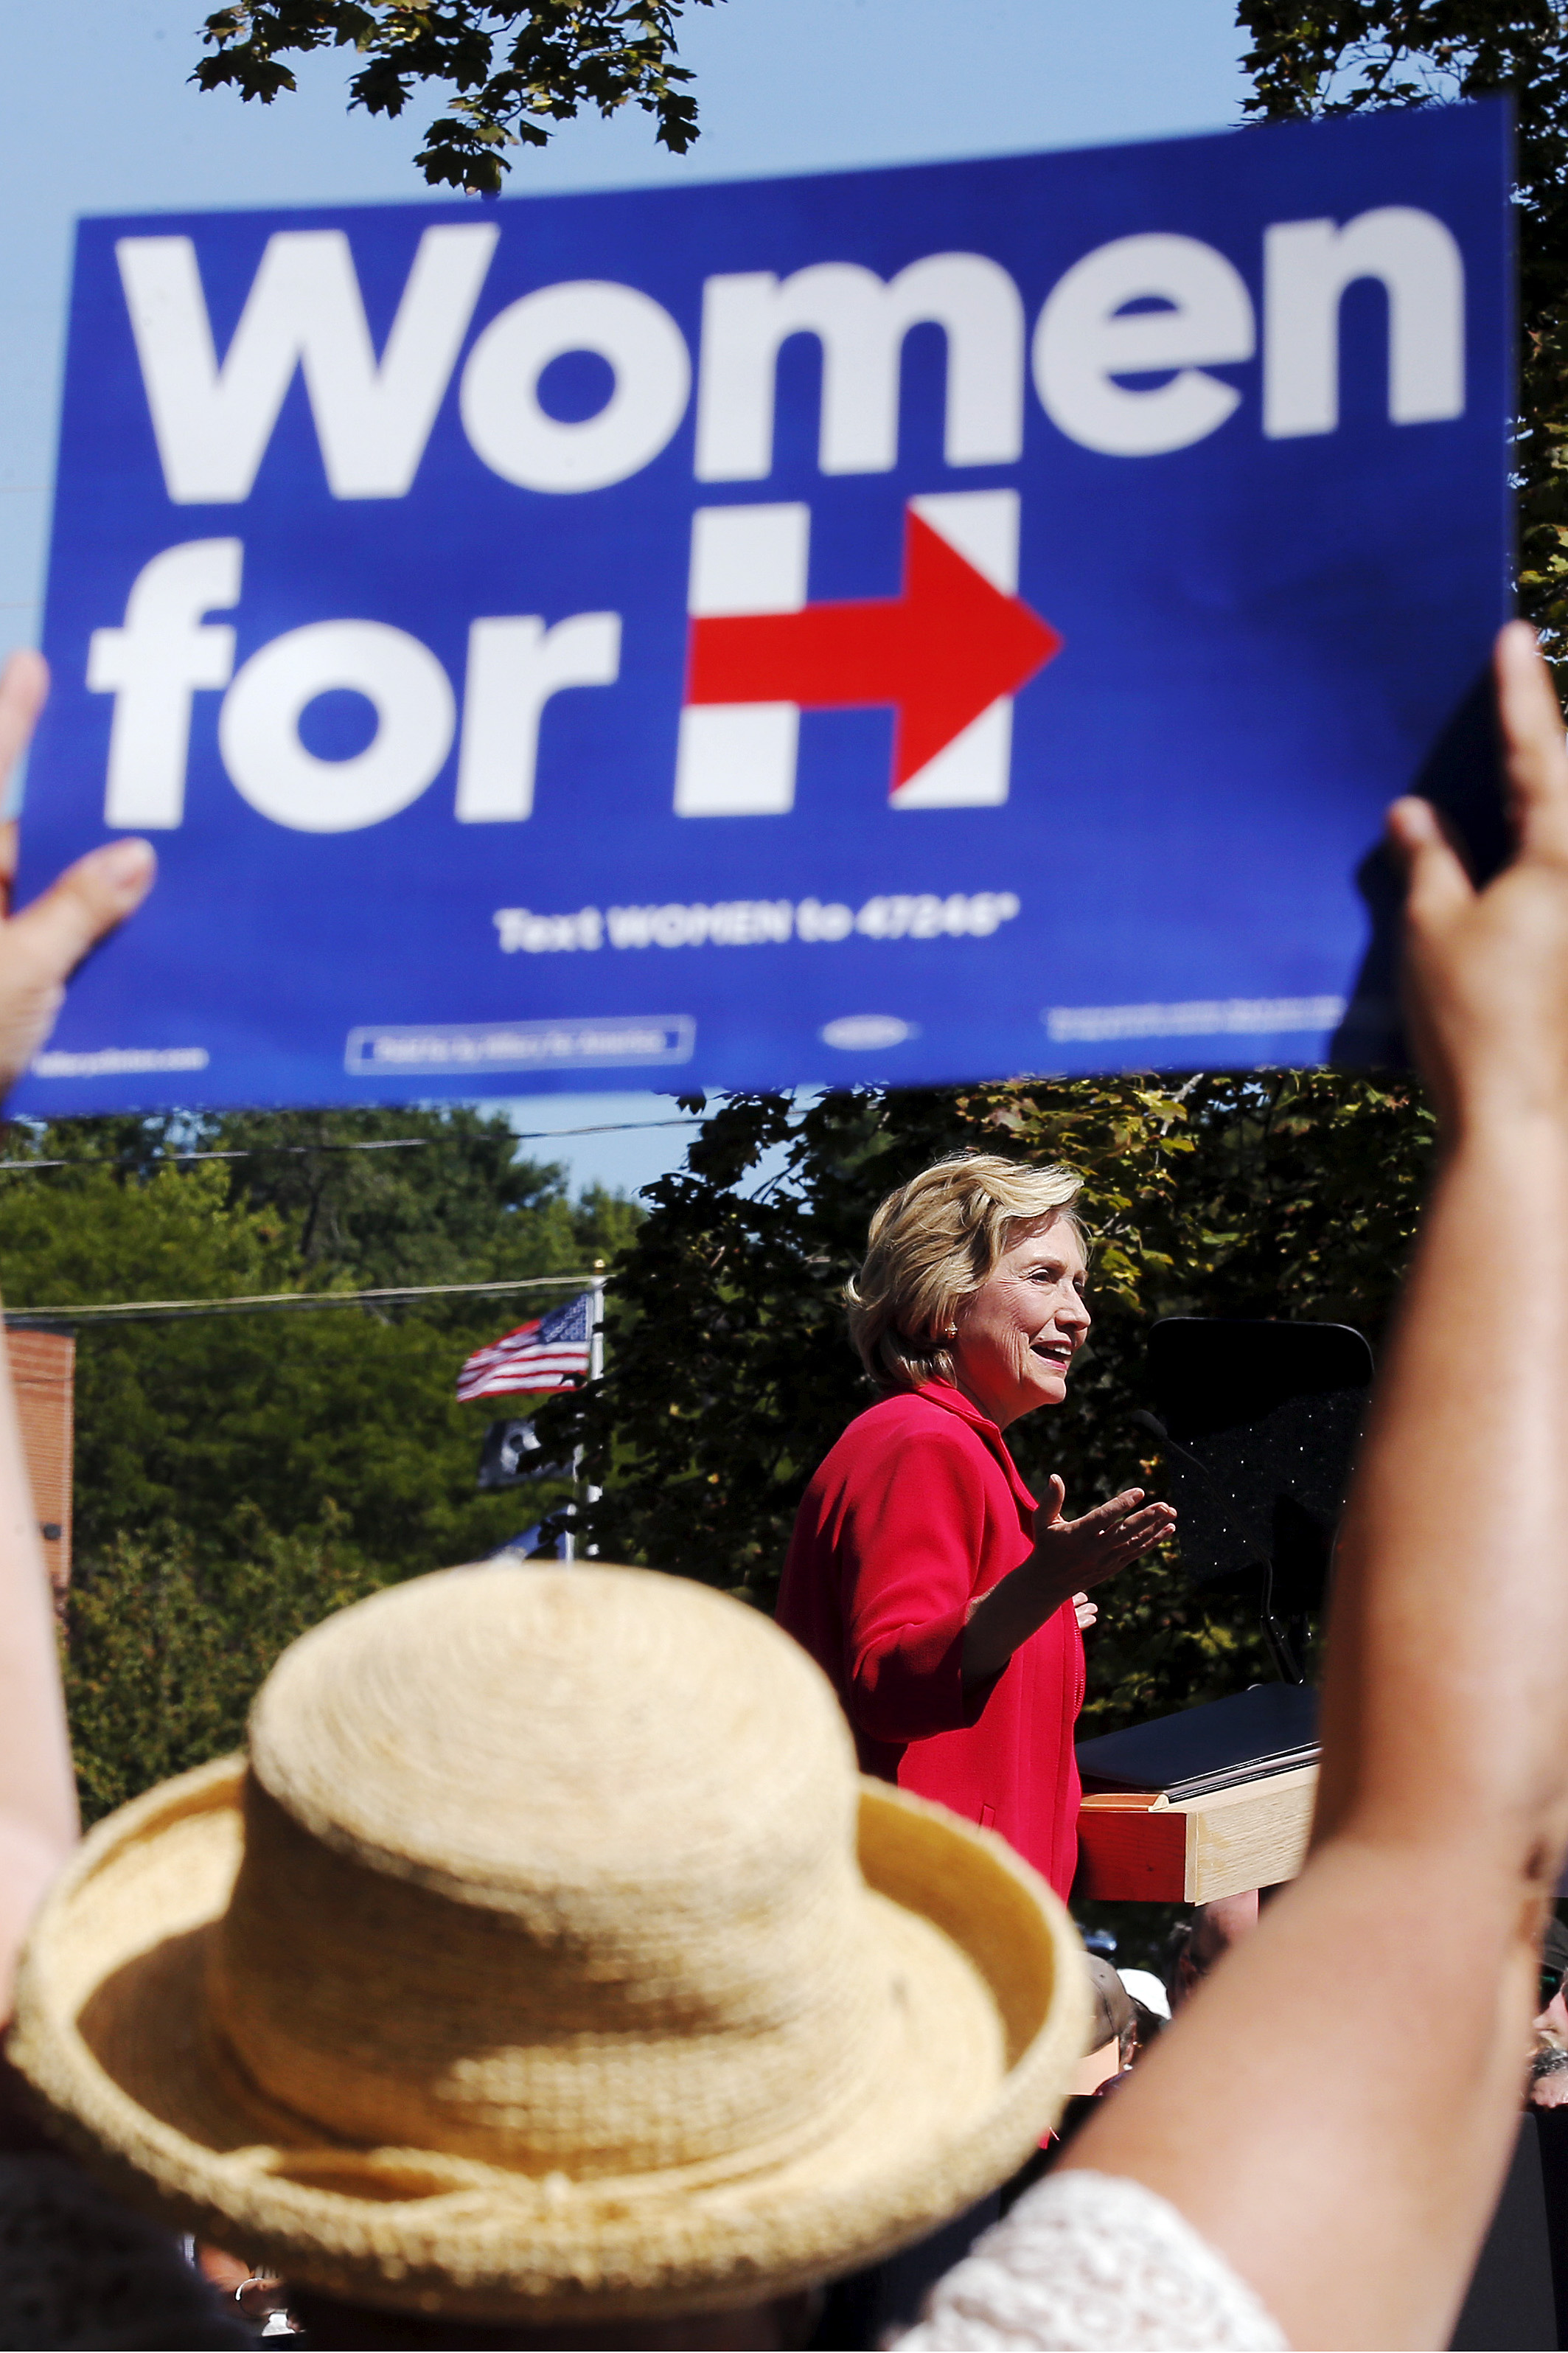 Democratic presidential candidate Hillary Clinton speaks at a 'Women for Hillary' campaign rally in Portsmouth, N.H. on Sept. 5. (Brian Snyder—Reuters)